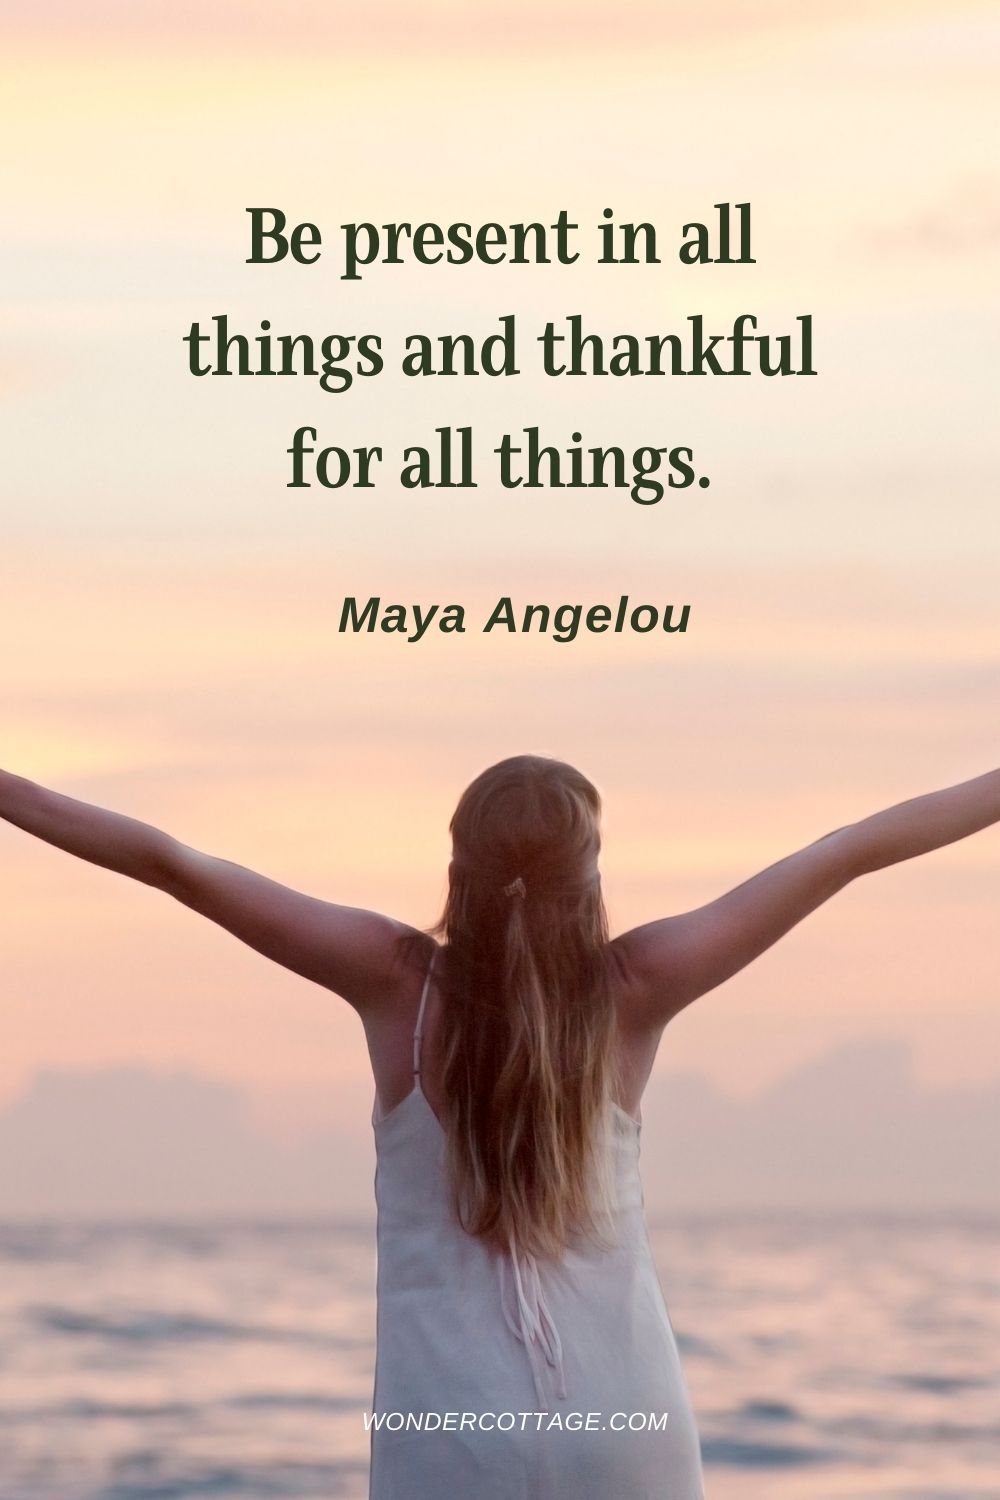 Be present in all things and thankful for all things. Maya Angelou